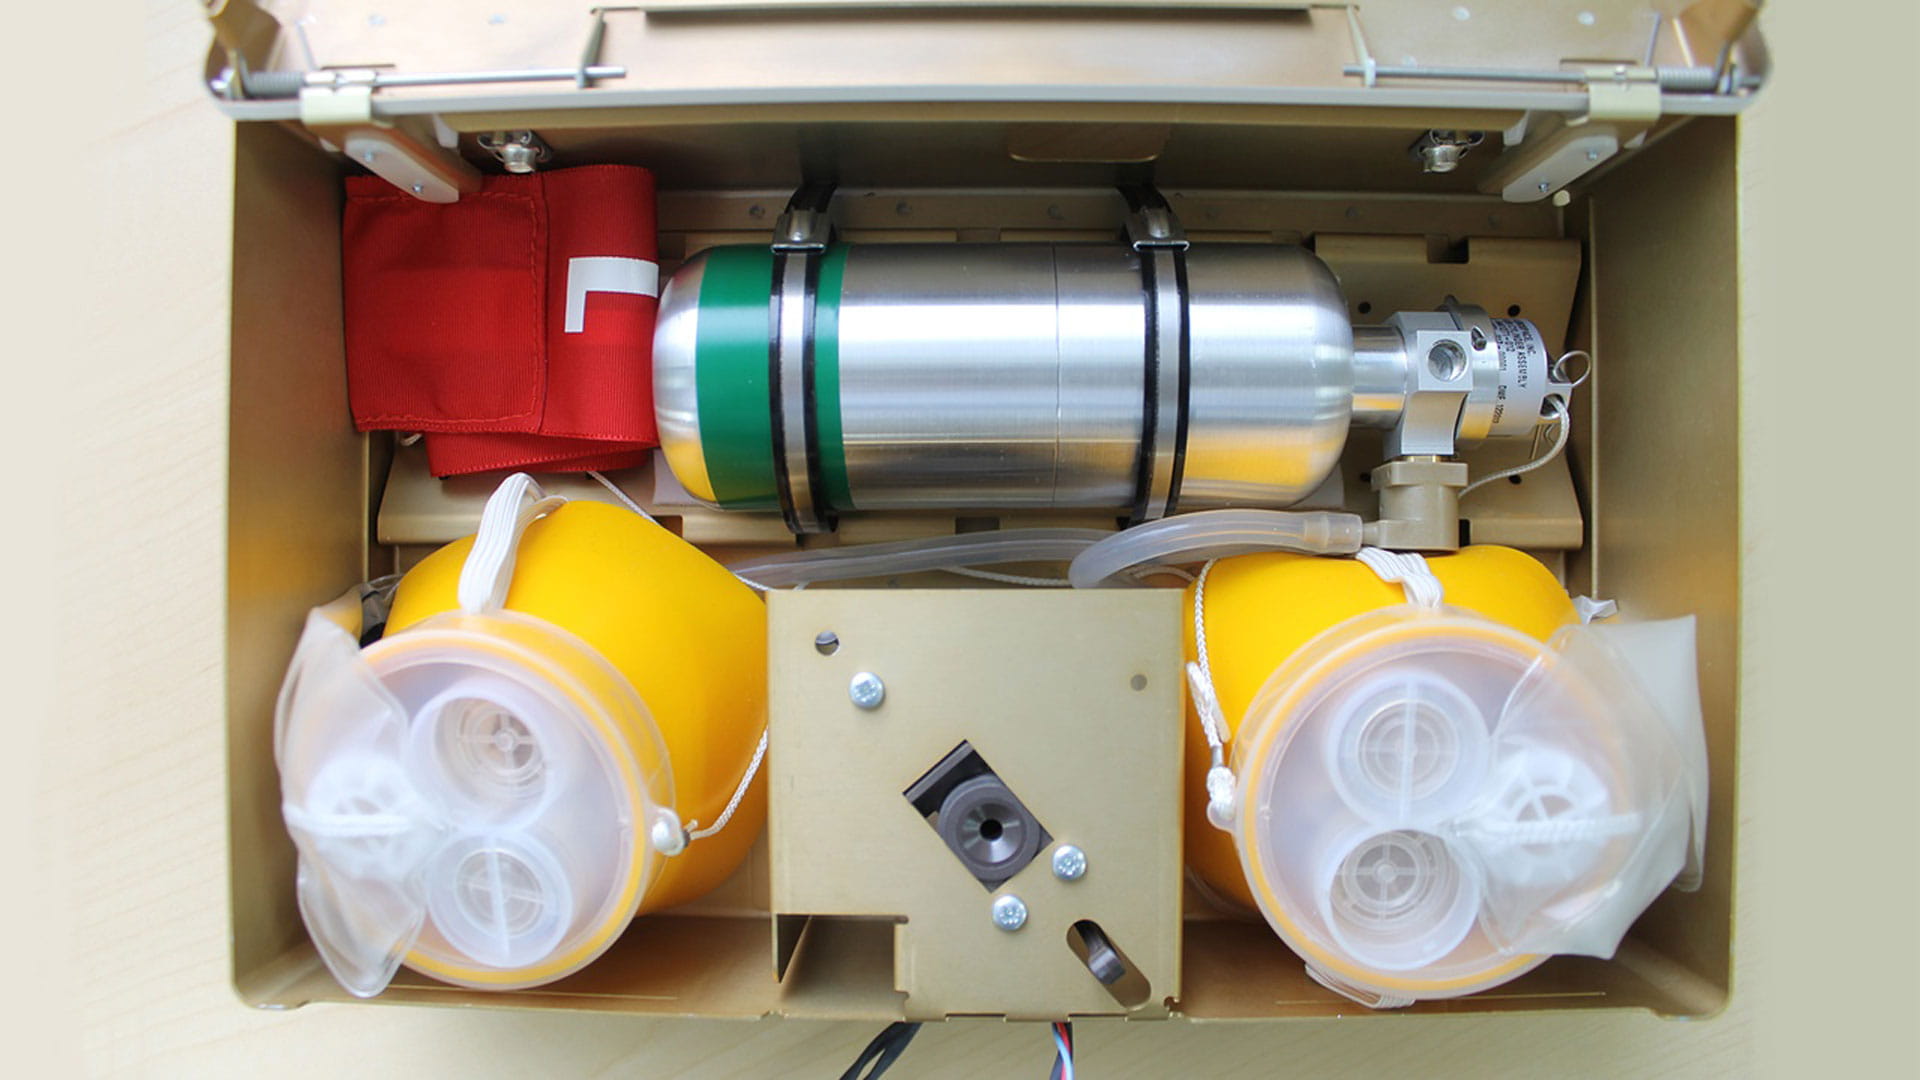 Two oxygen masks and one canister